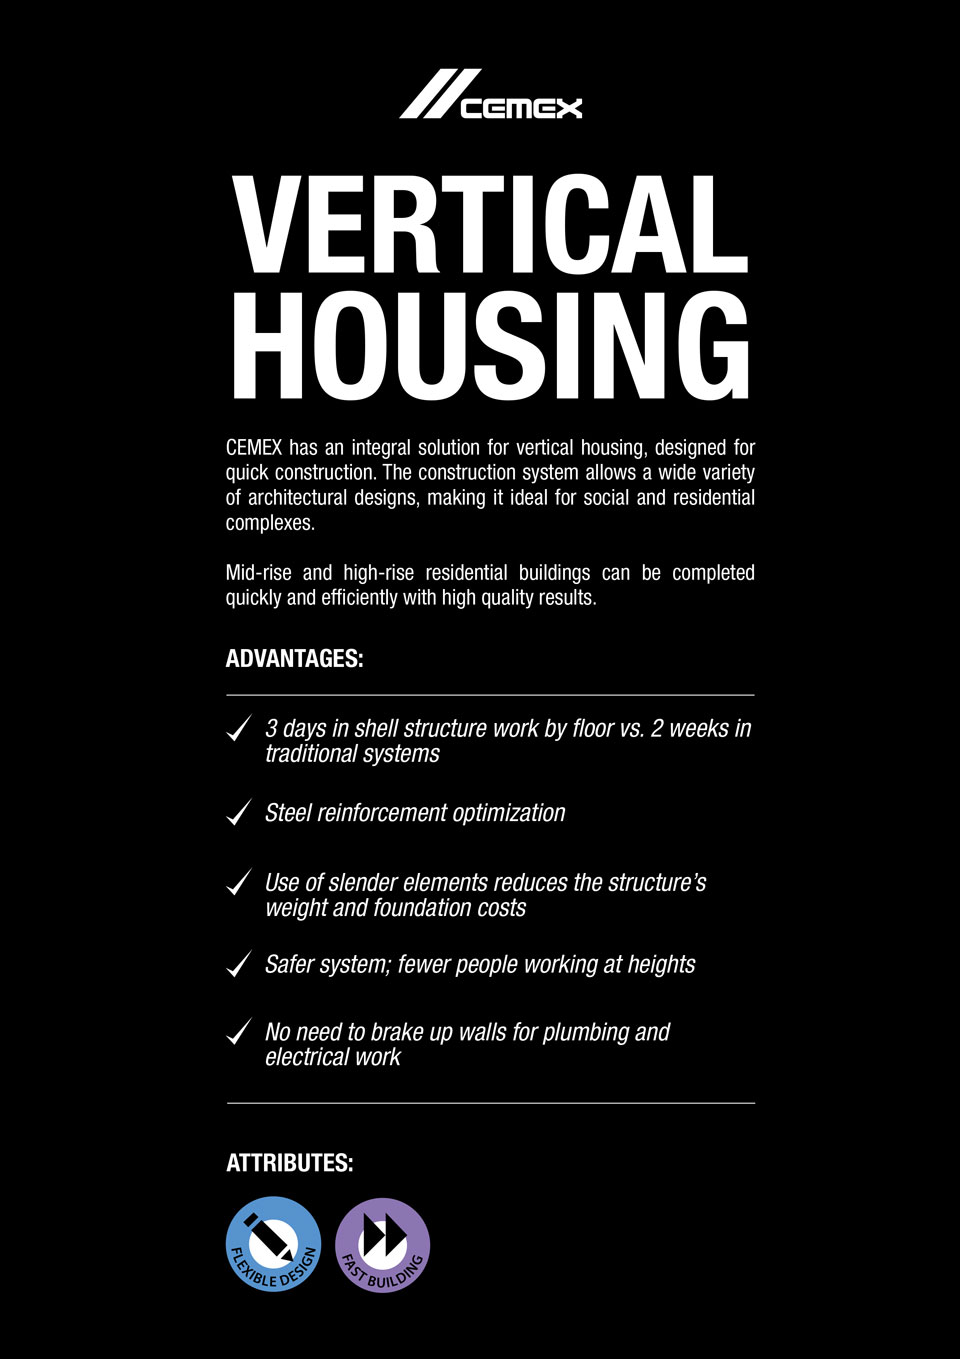 An image describing the advanages and characteristics of the Vertical Housing solution.